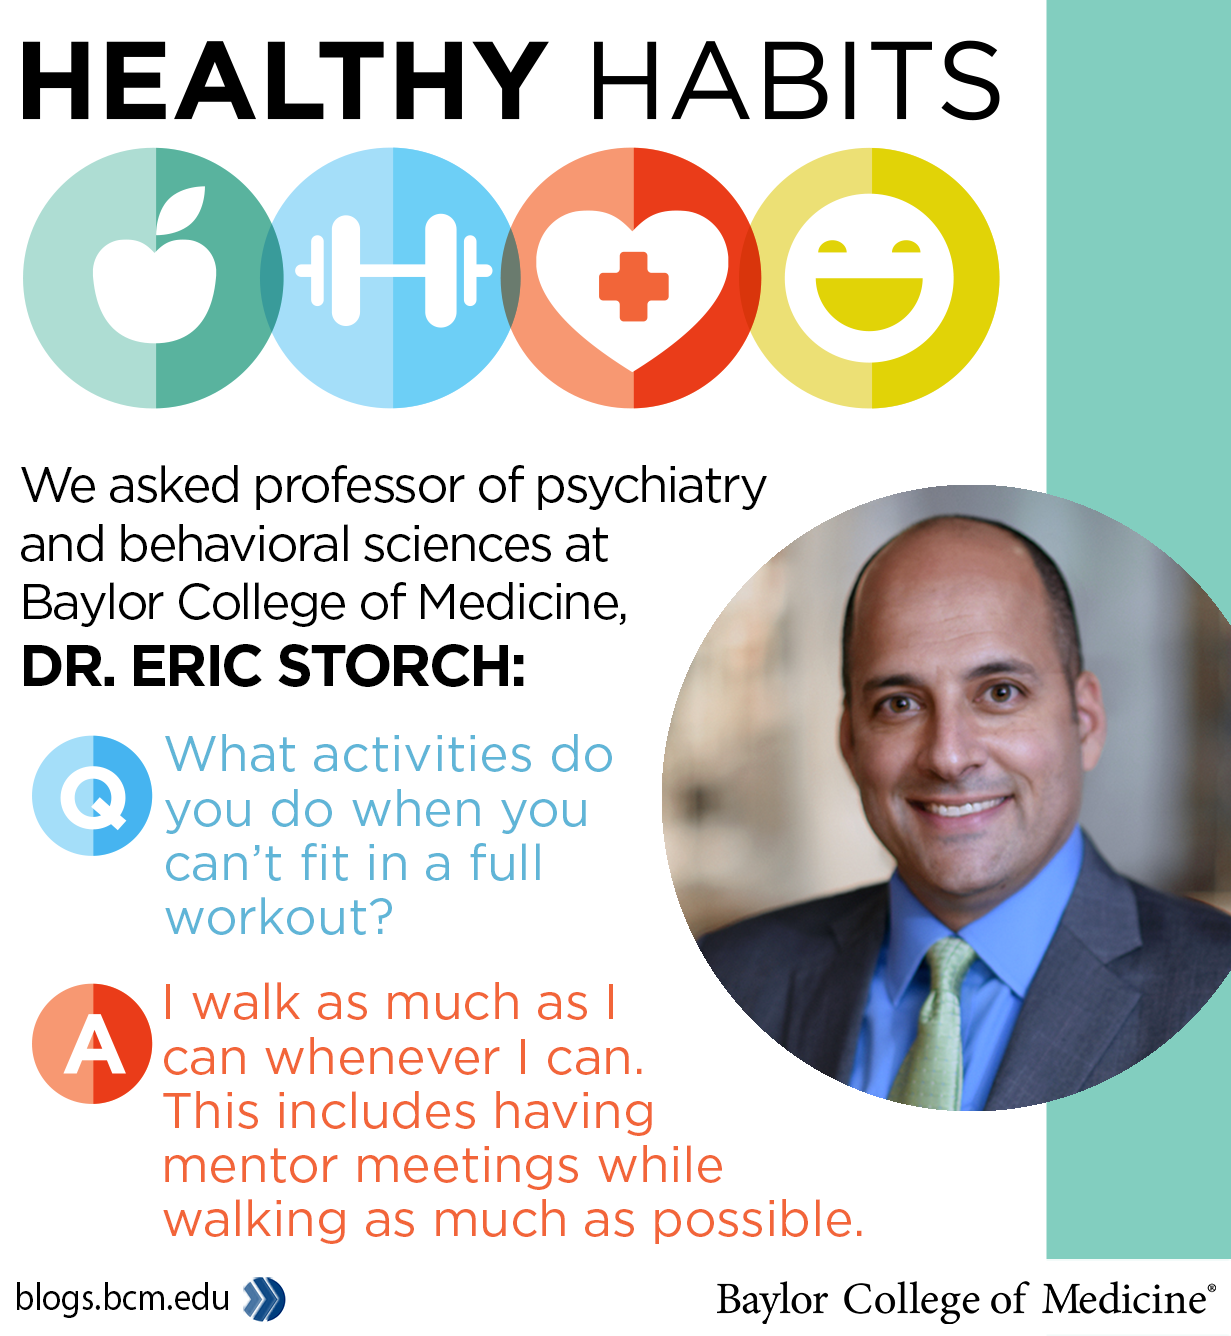 eric-storch-healthy-habits